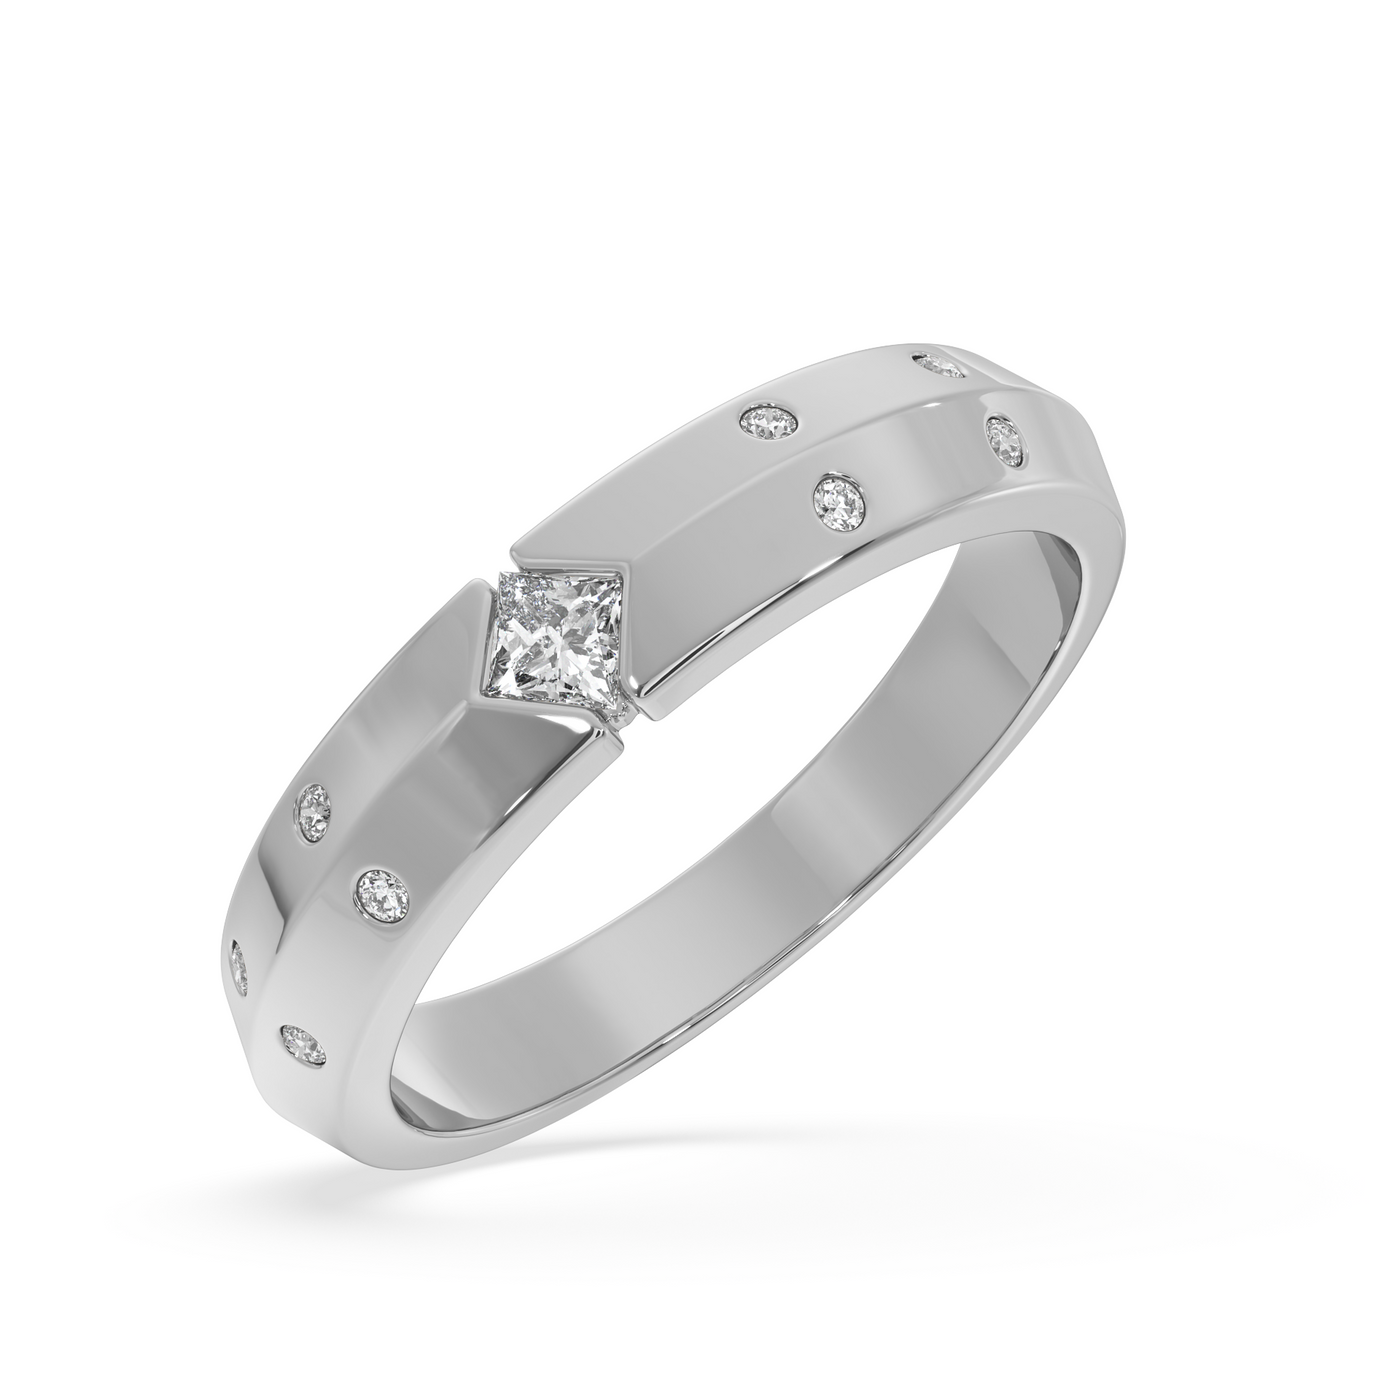 Women's Ring in Platinum, Hammered Finish Solitaire